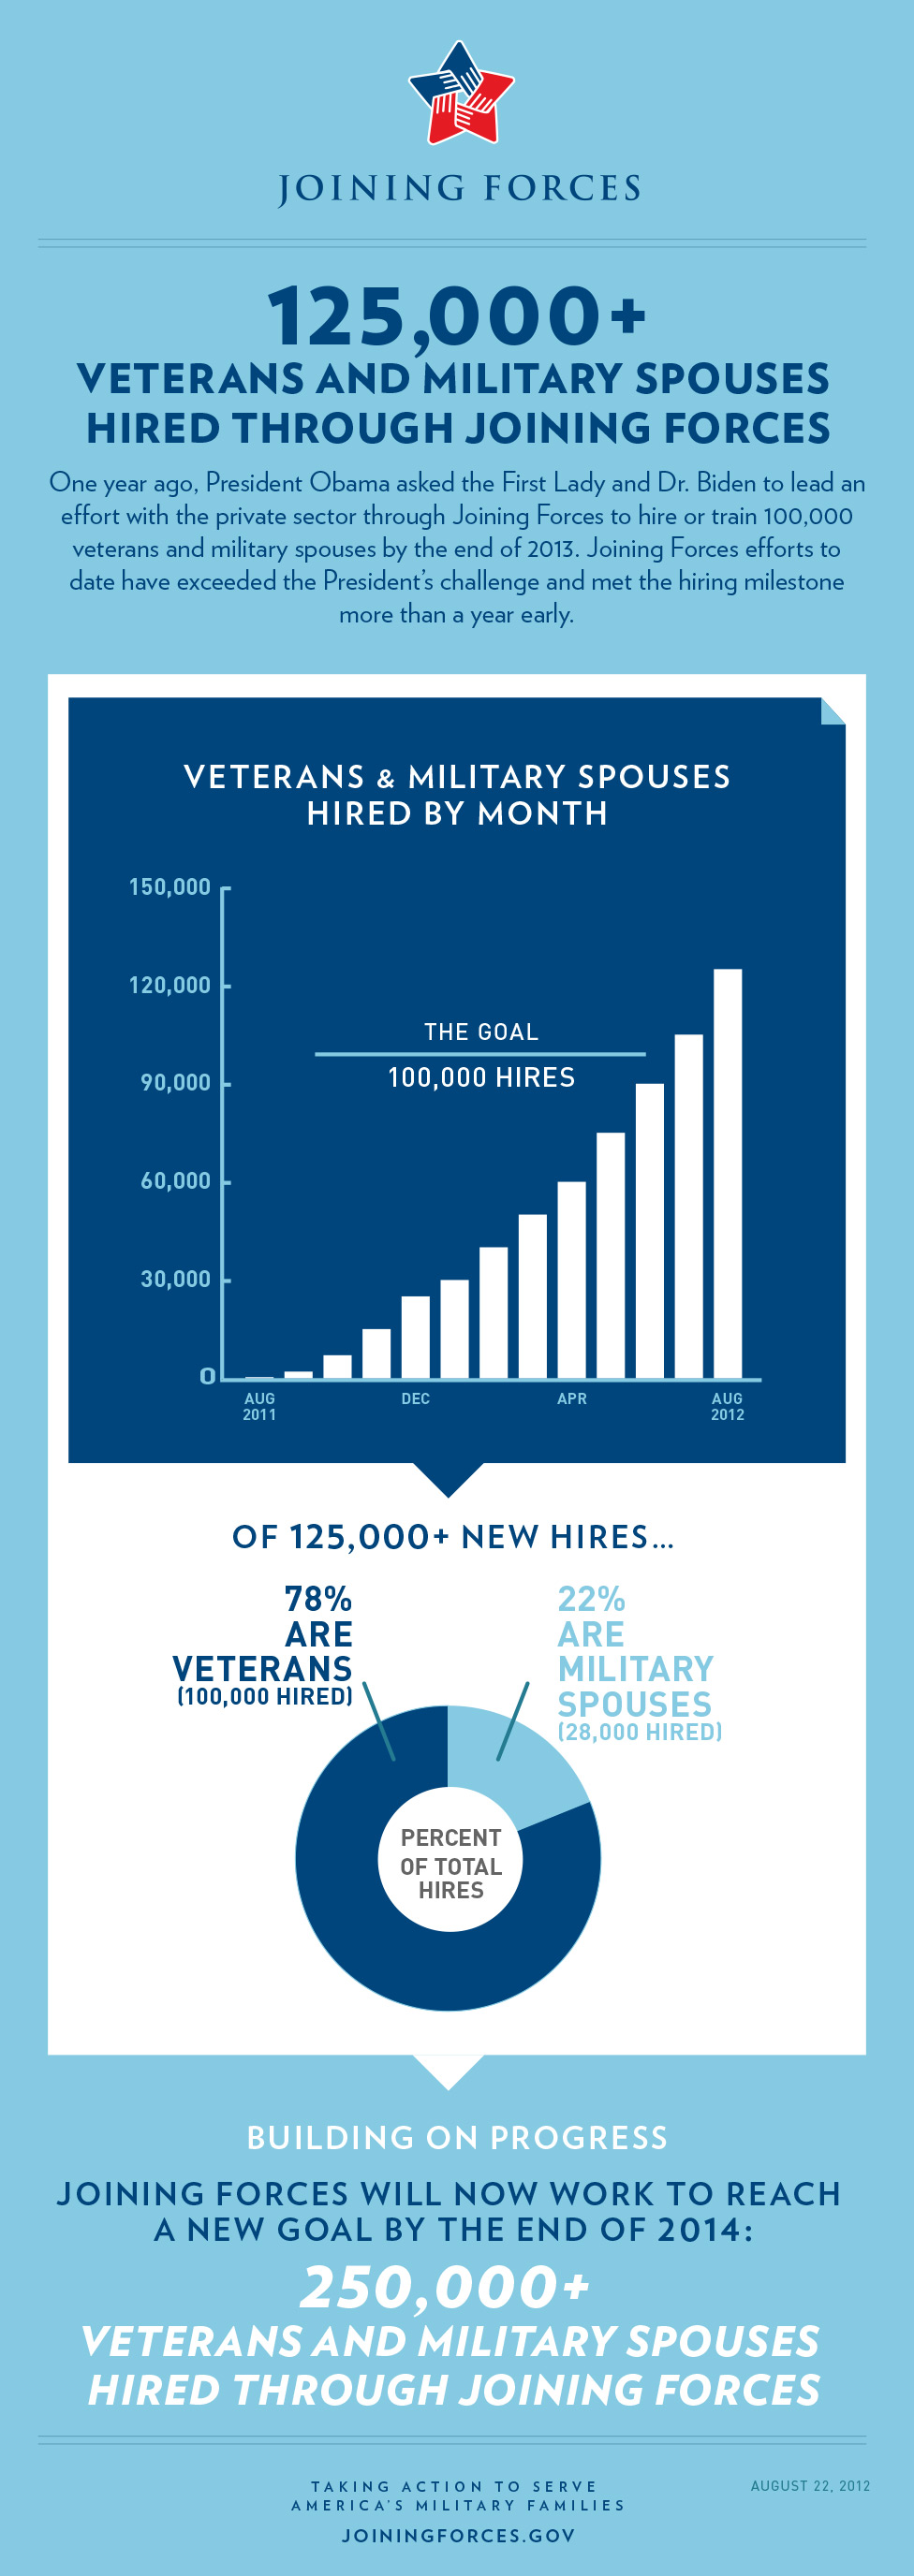  2,000 companies had hired or trained an amazing 125,000 veterans and military s